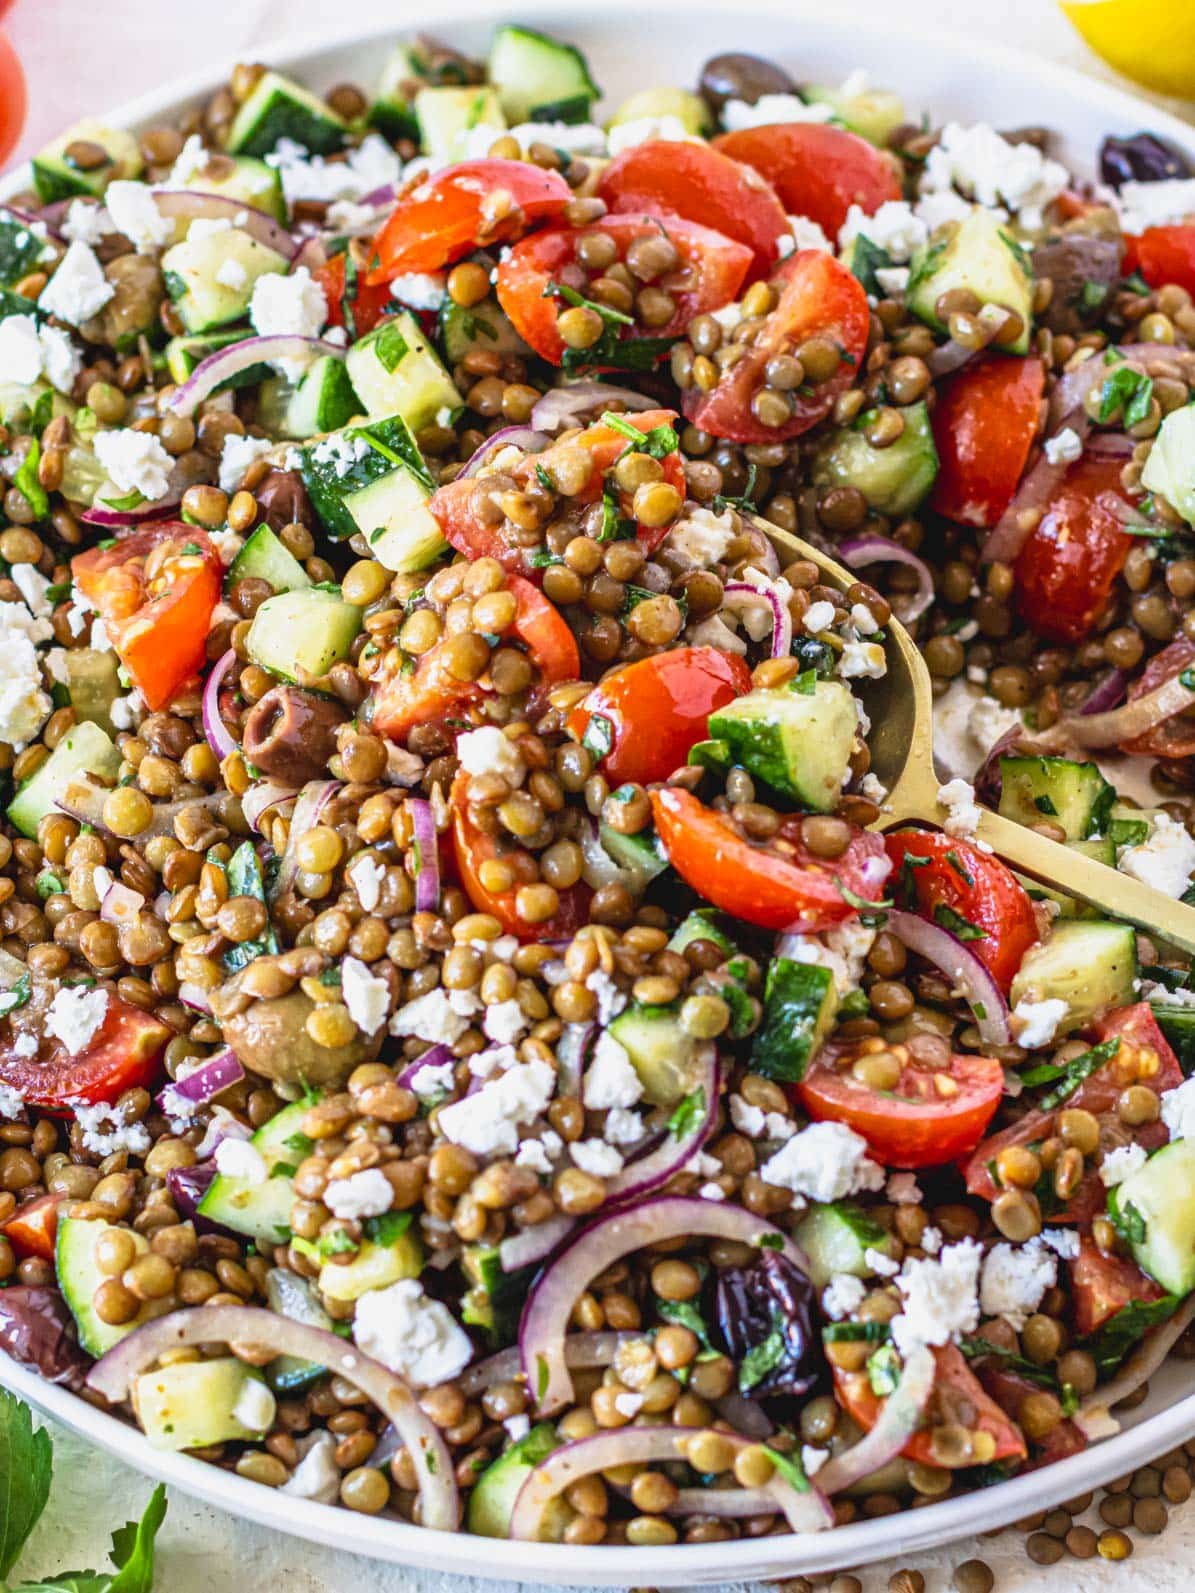 Lentil salad with cherry tomatoes, cucumber and olives